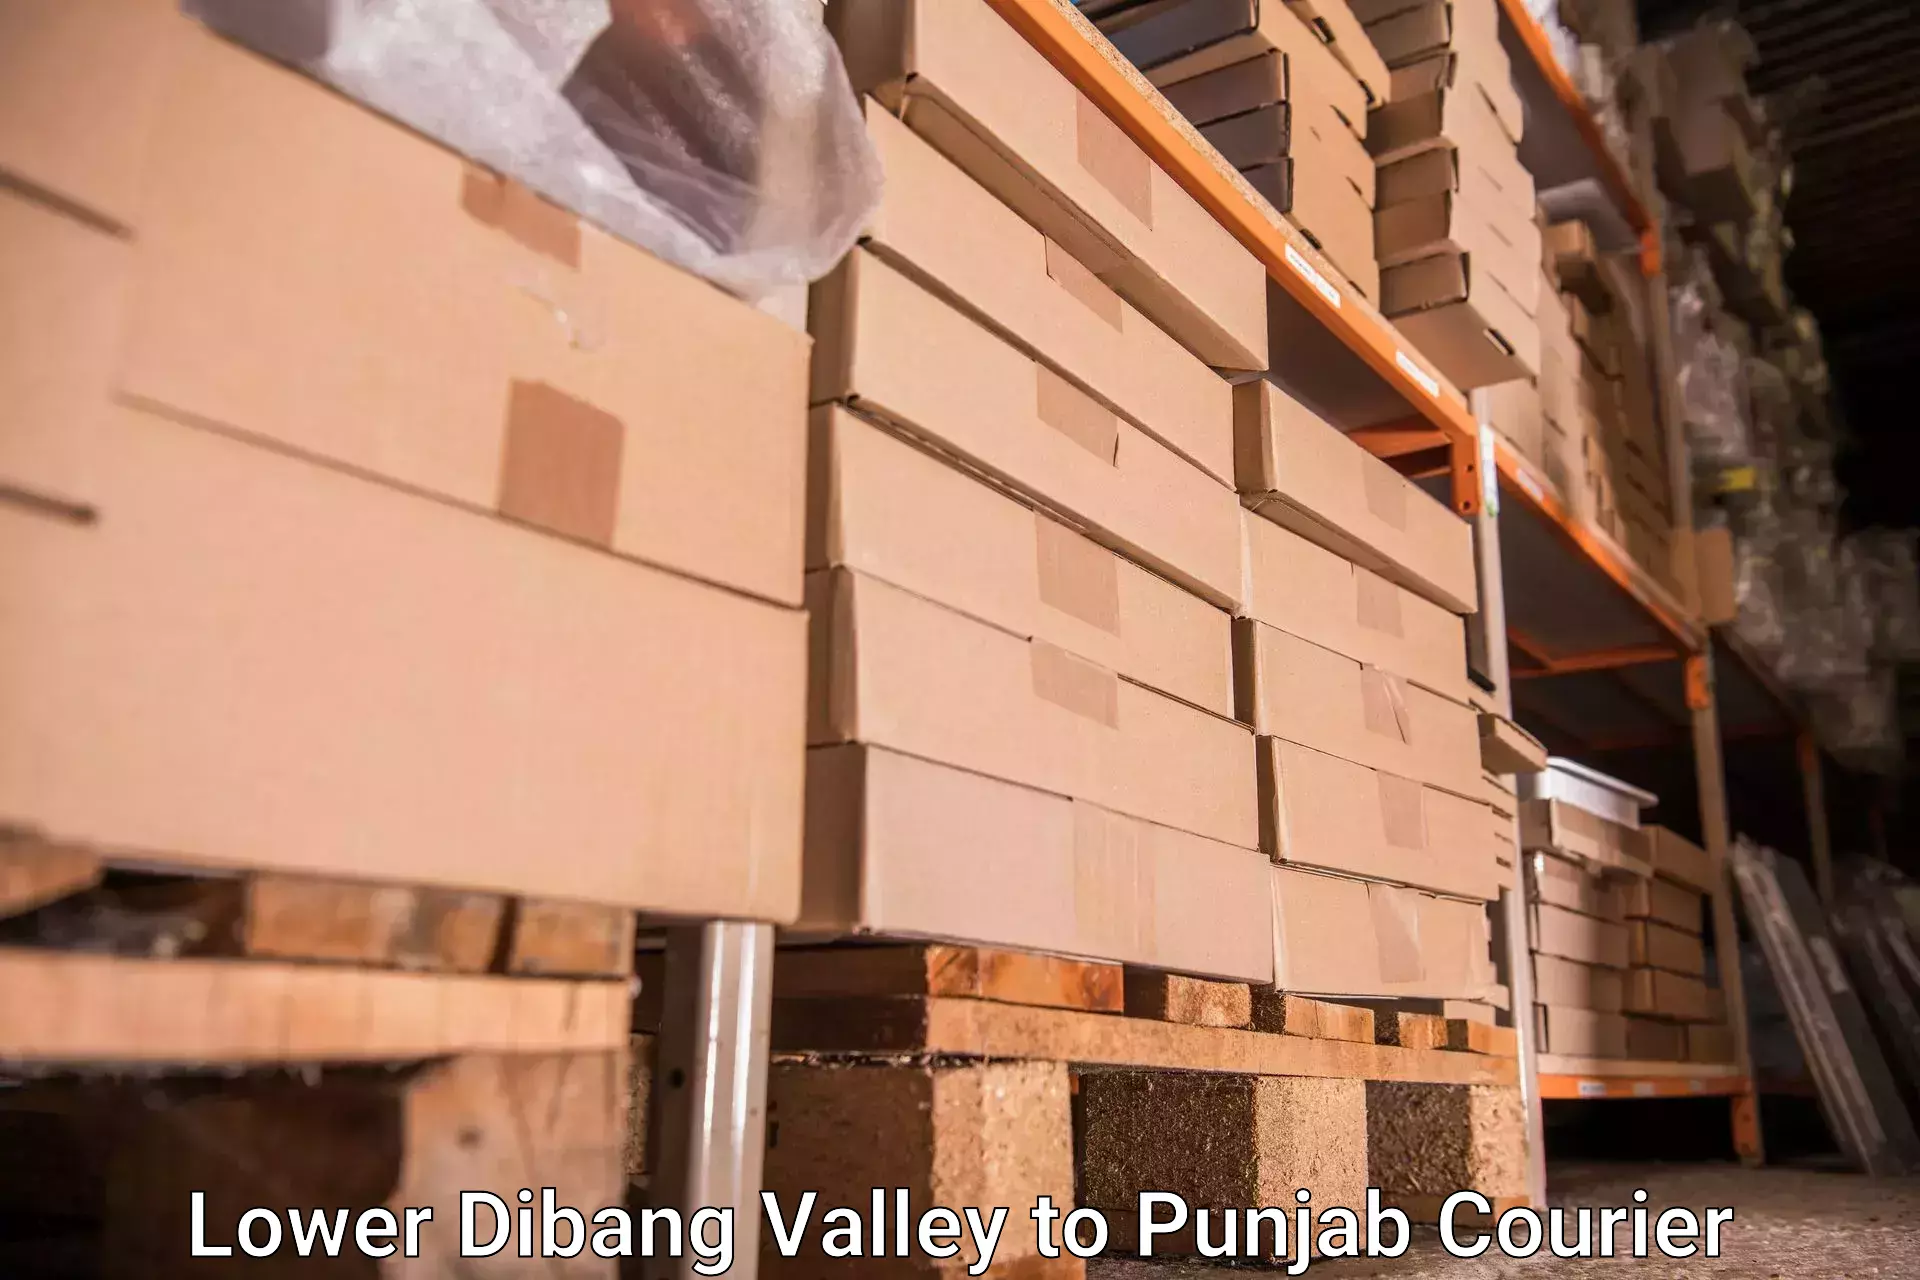 Instant baggage transport quote Lower Dibang Valley to Patiala